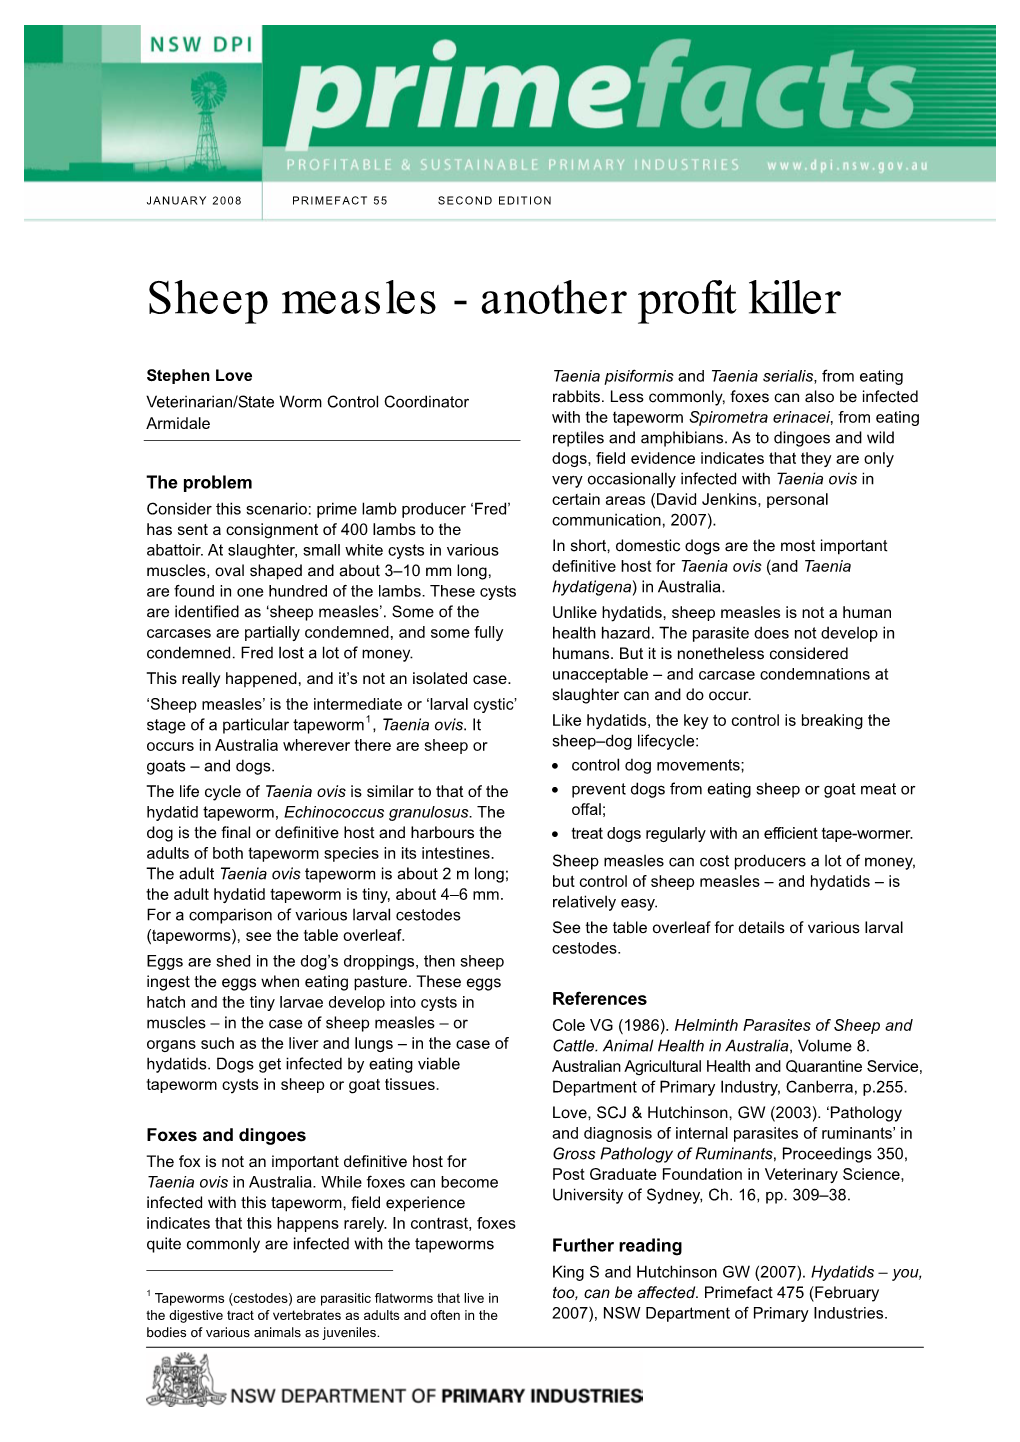 Sheep Measles - Another Profit Killer